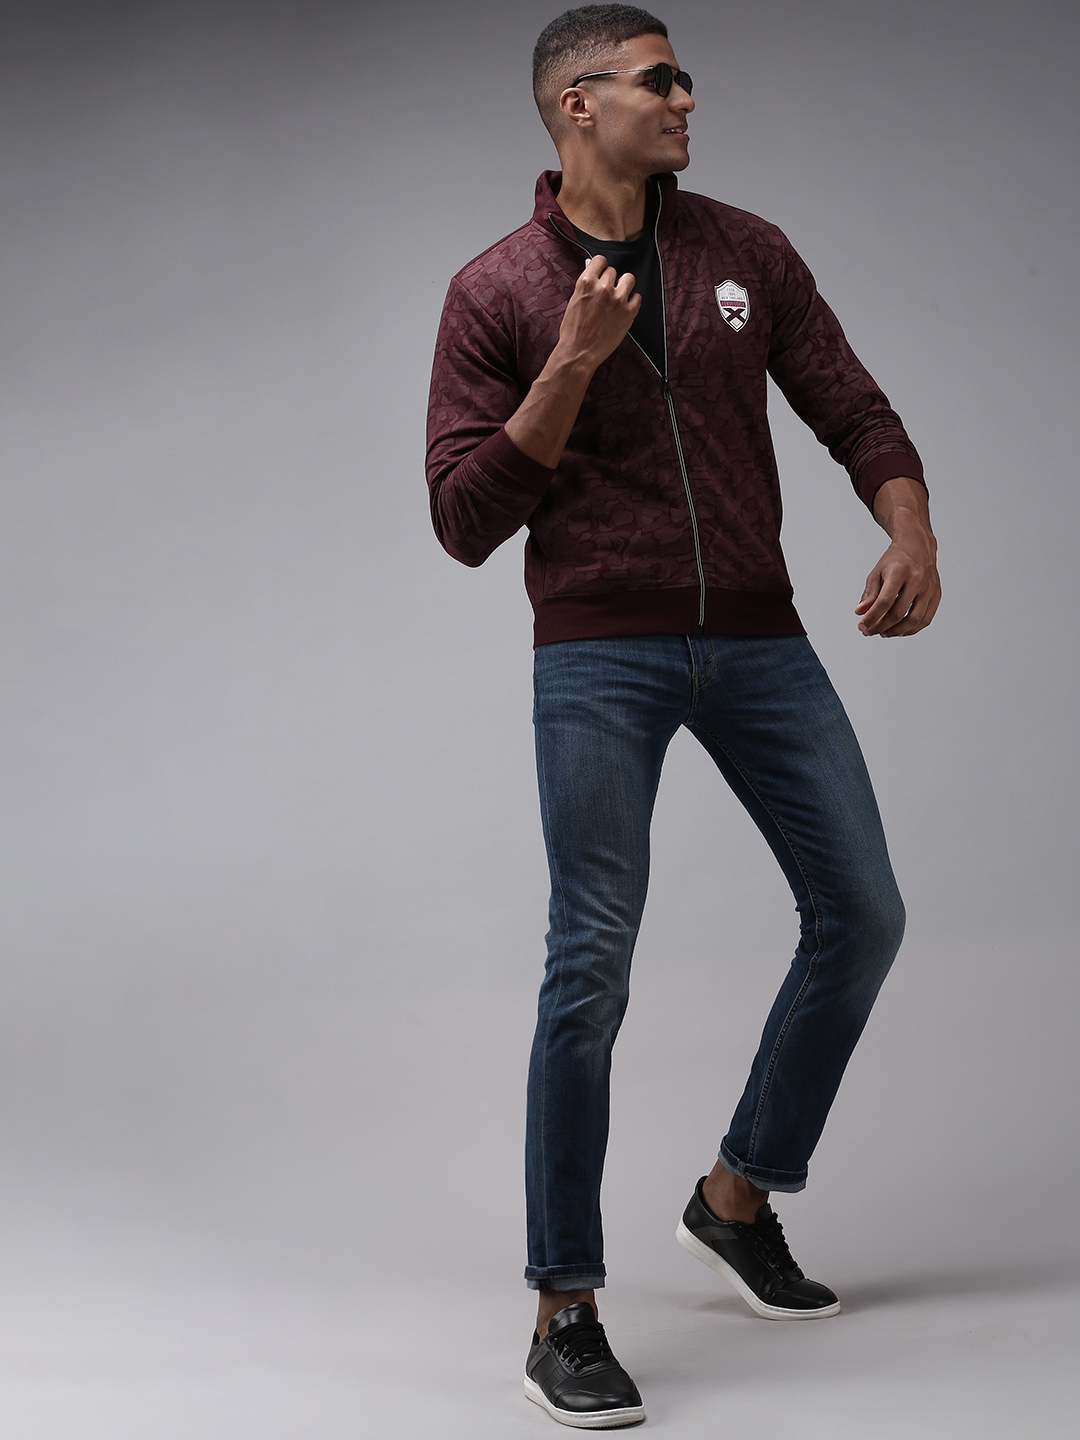 Men's Red Cotton Printed Activewear Jackets